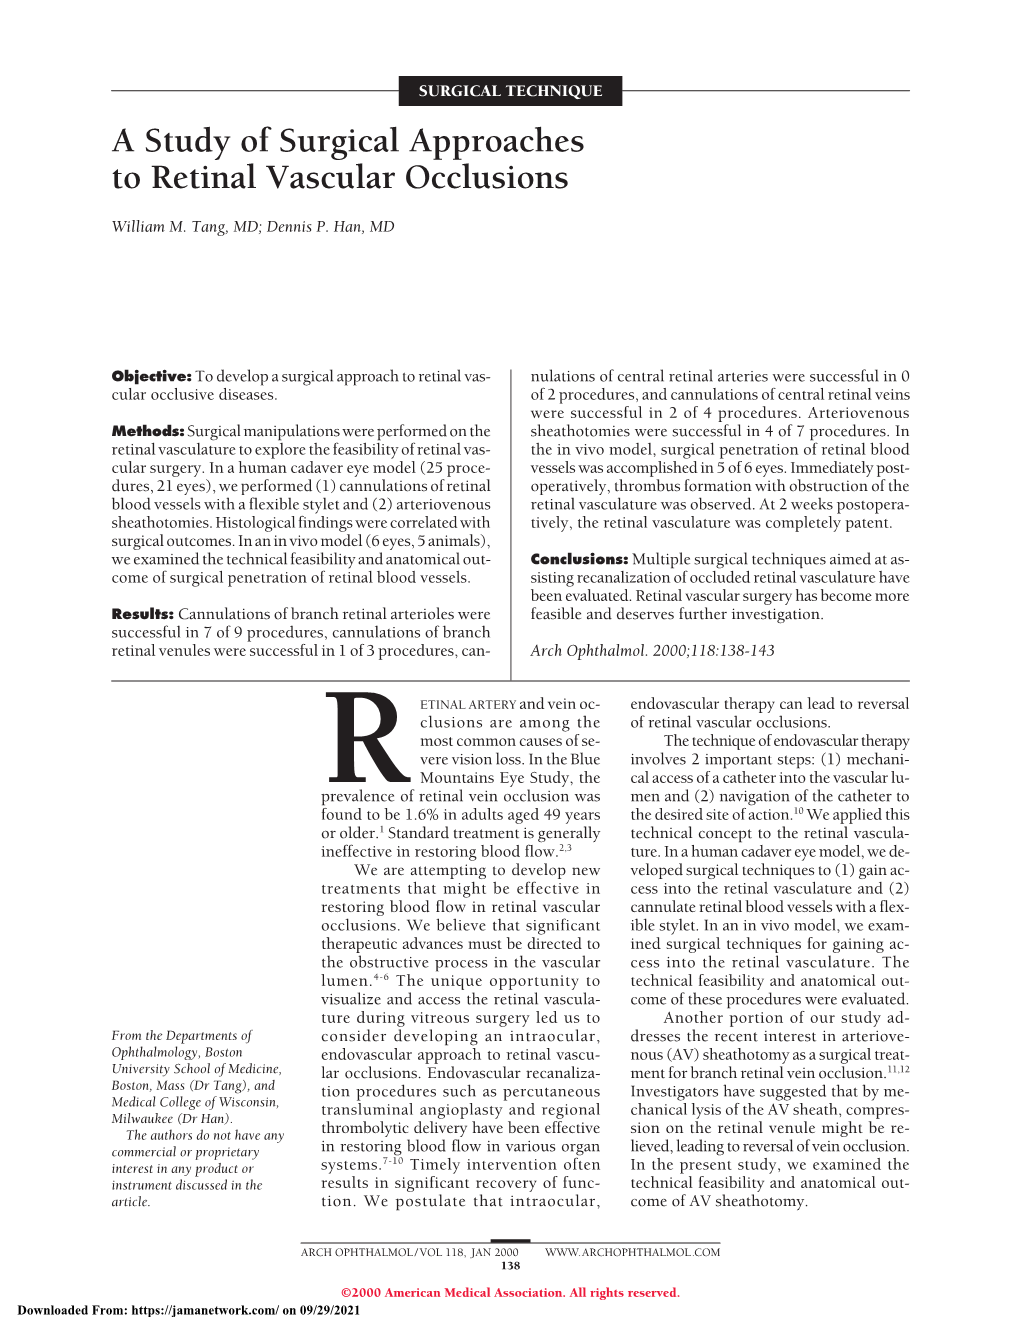 A Study of Surgical Approaches to Retinal Vascular Occlusions